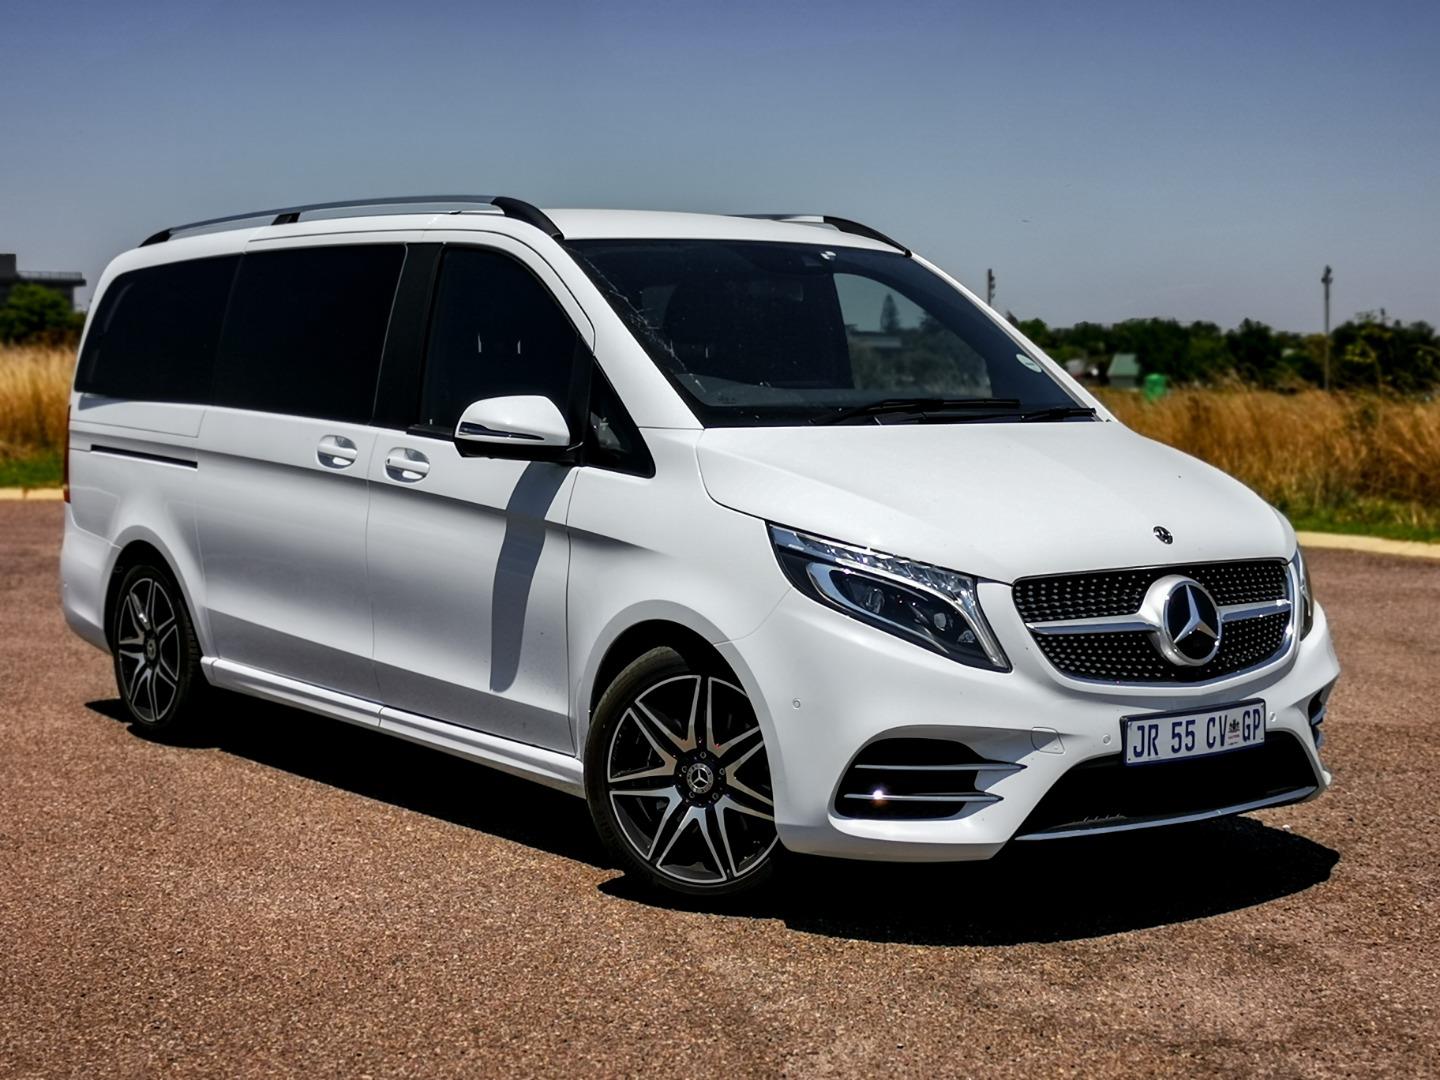 Mercedes-Benz V 300 d (2020) review: The ultimate luxury people-carrier - Expert Mercedes-Benz V ...